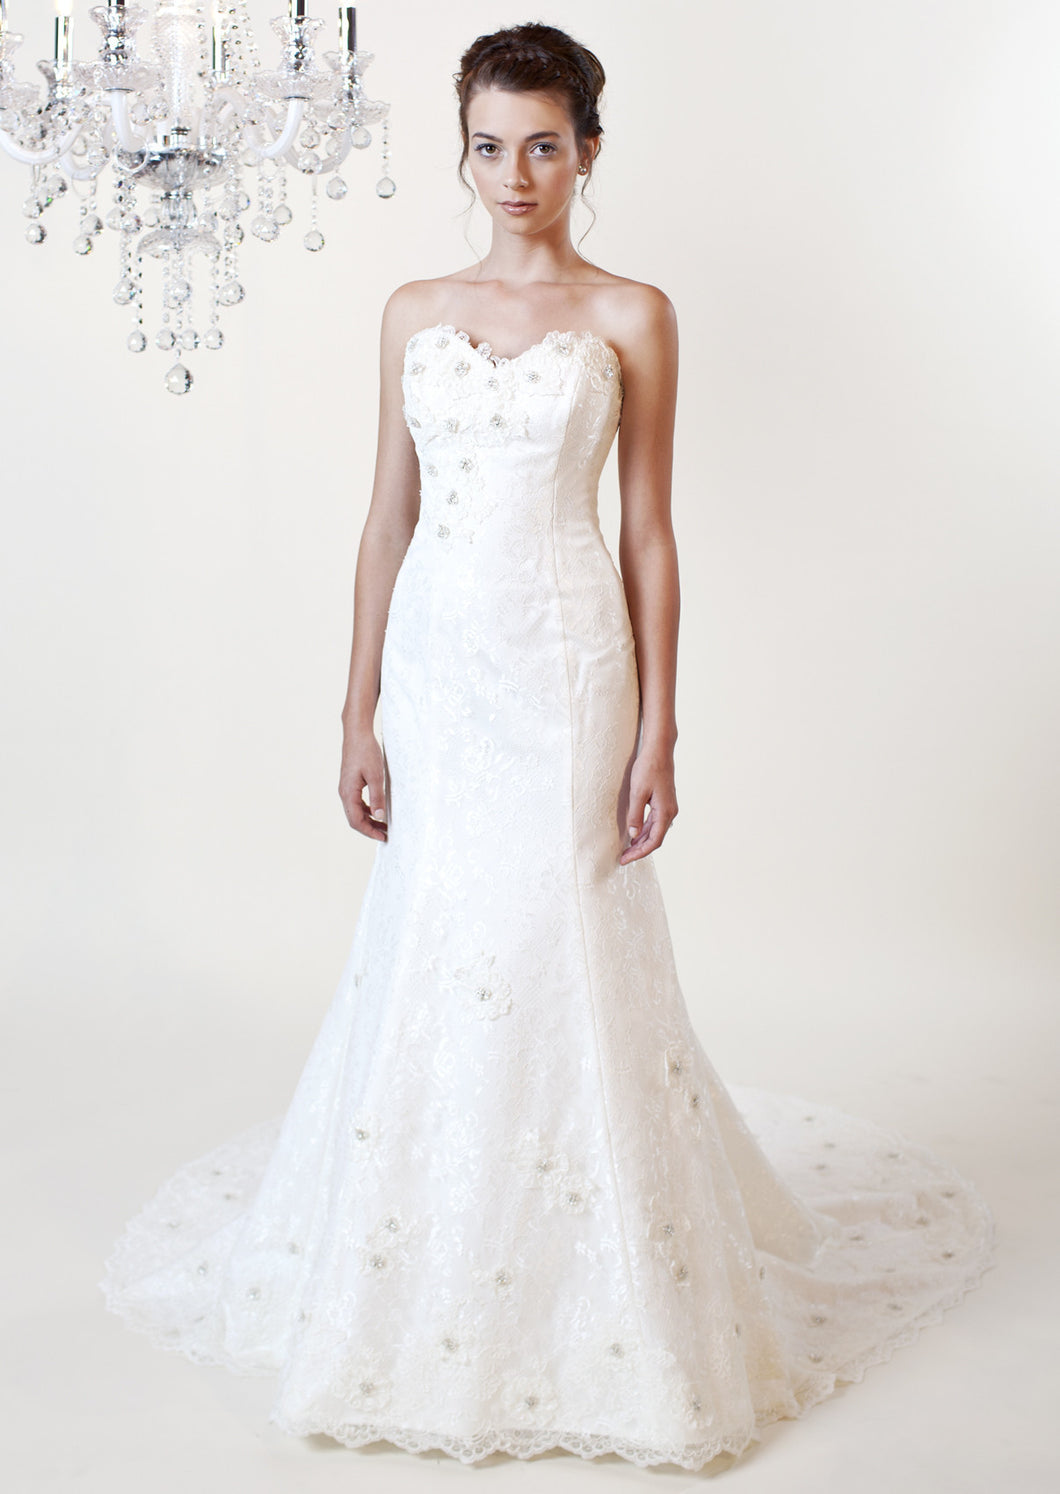 Winnie Couture 'Abigail' - Winnie Couture - Nearly Newlywed Bridal Boutique - 1